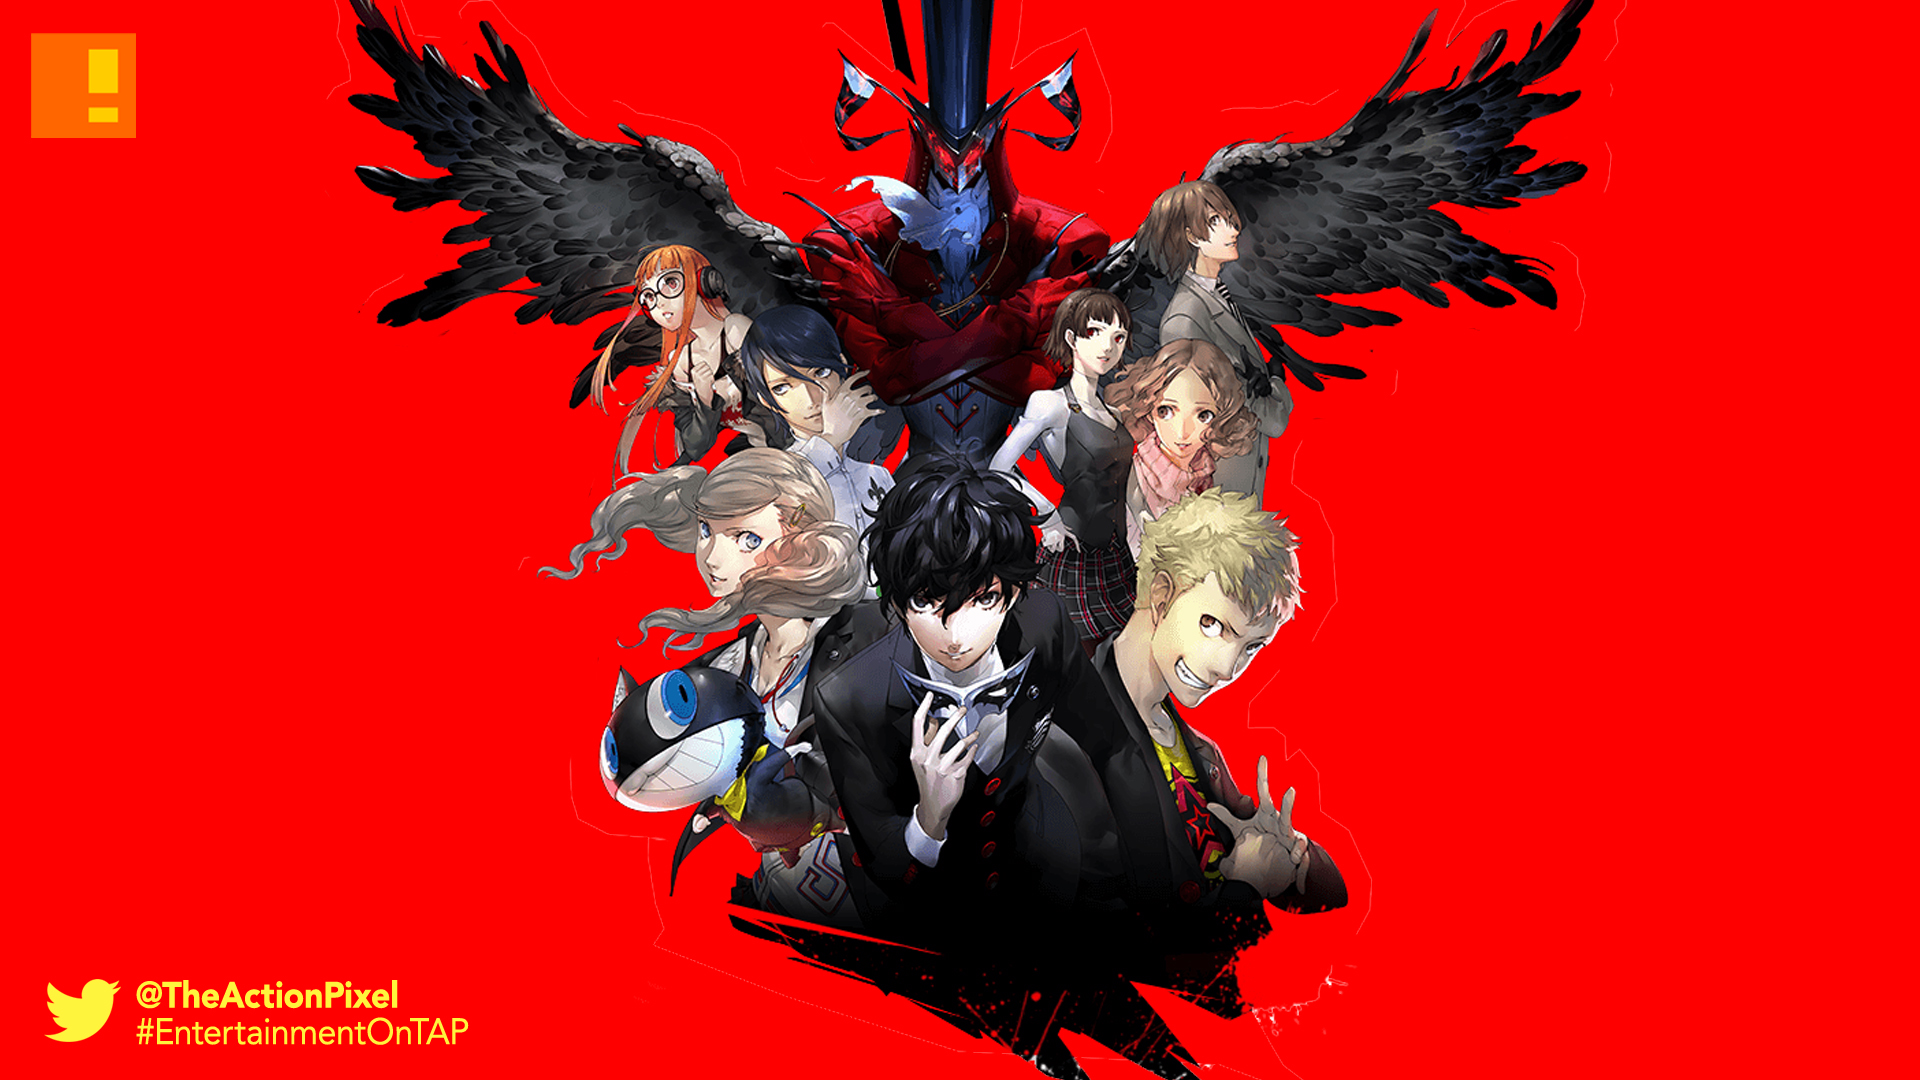 Persona 5” Game Mechanics Trailer released – The Action Pixel